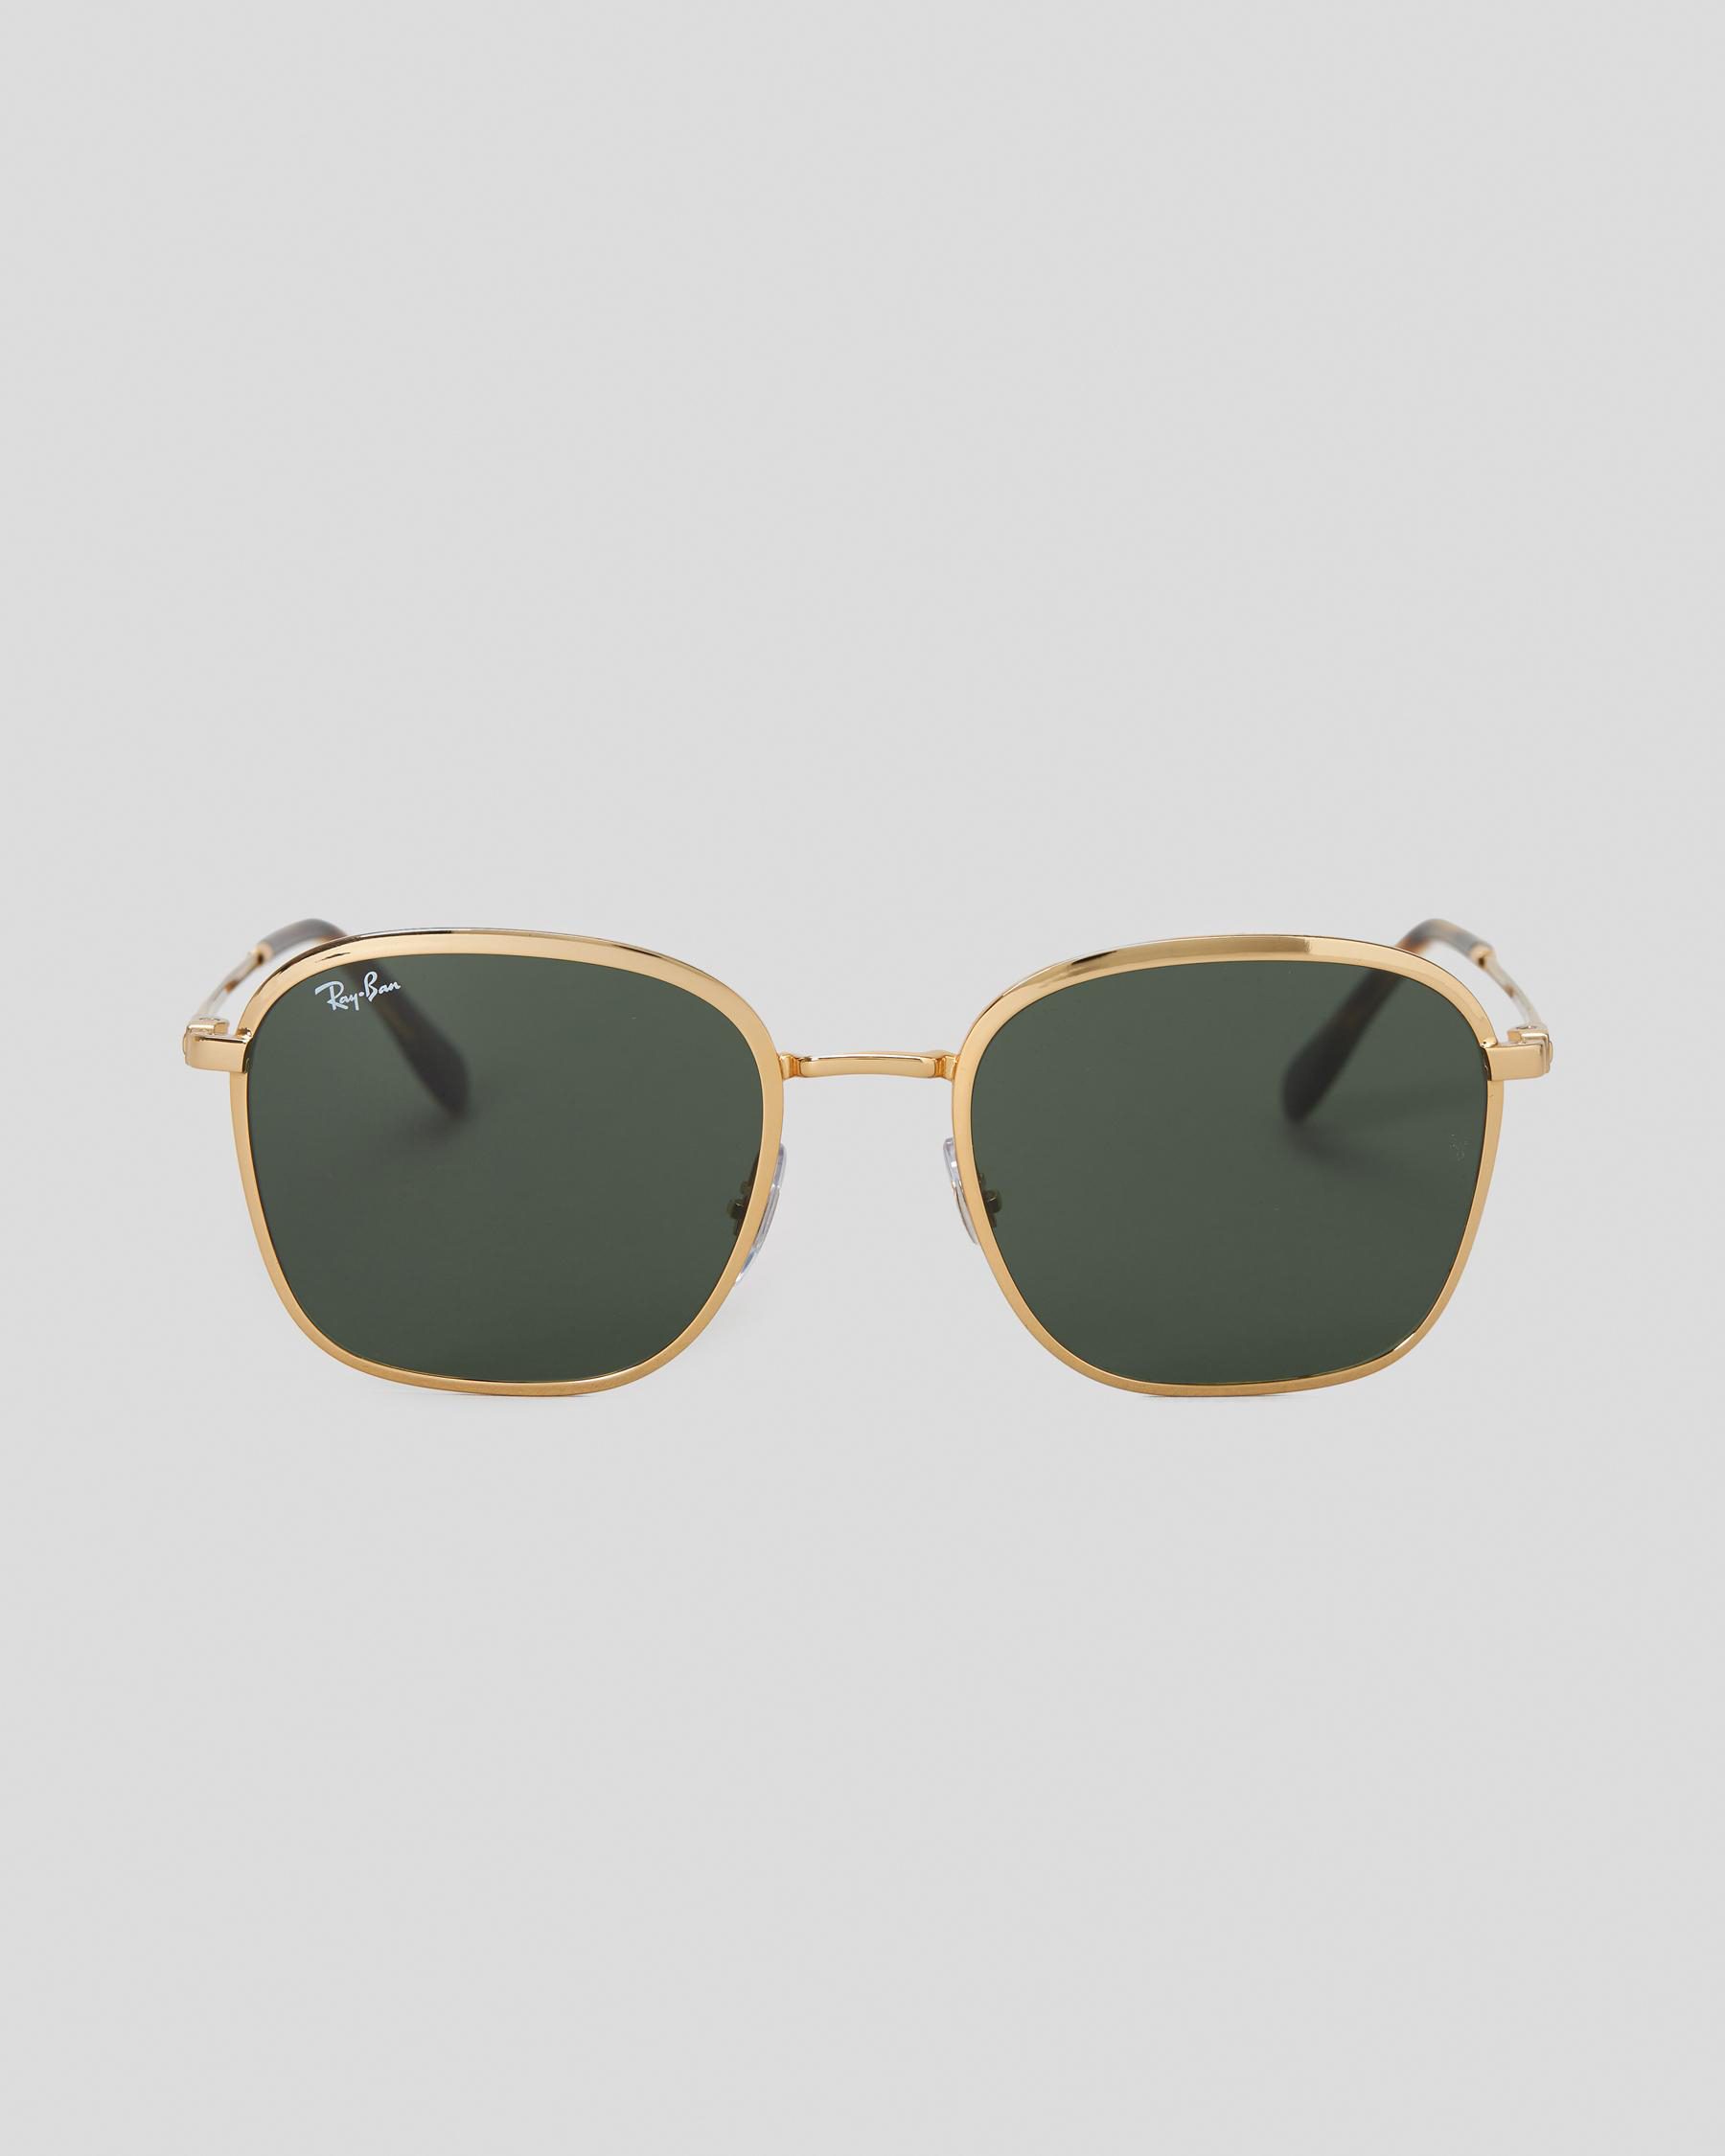 Ray-Ban 0RB3720 Sunglasses In Gold / Green - FREE* Shipping & Easy ...